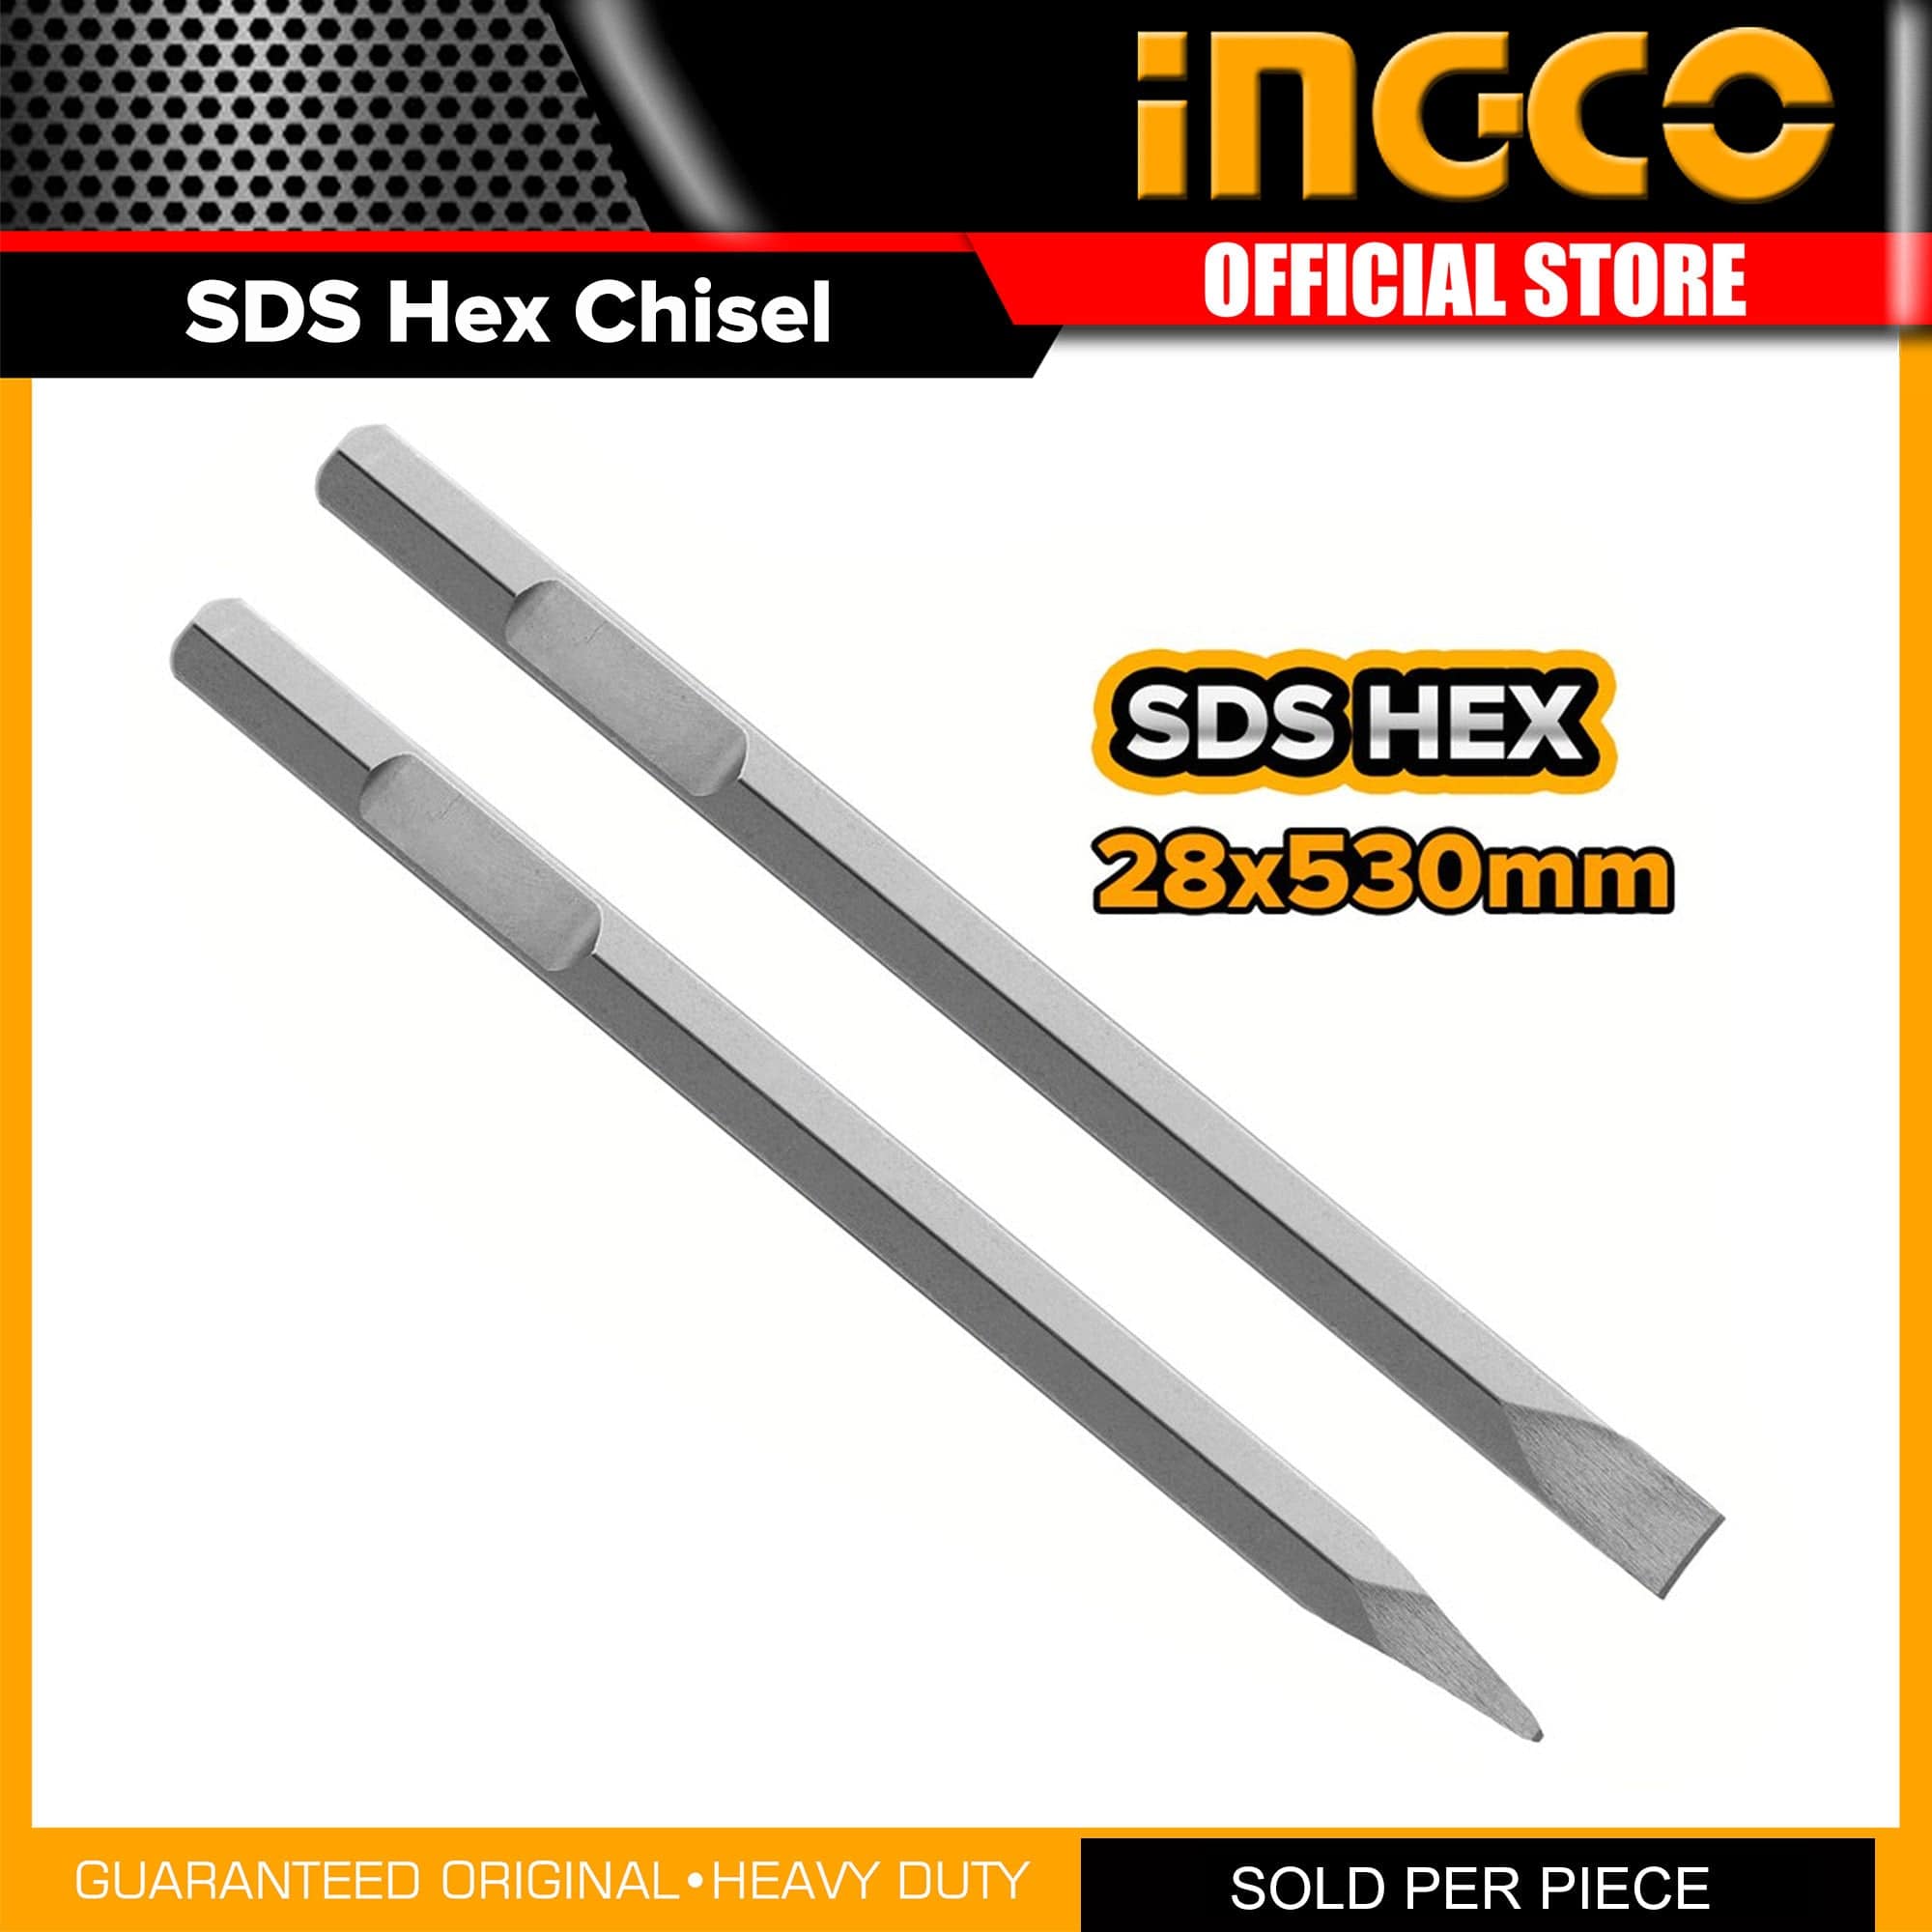 Ingco Hex Chisel 28mmx530mm - Pointed & Flat | Supply Master | Accra, Ghana Chisels Files Planes & Punches Buy Tools hardware Building materials